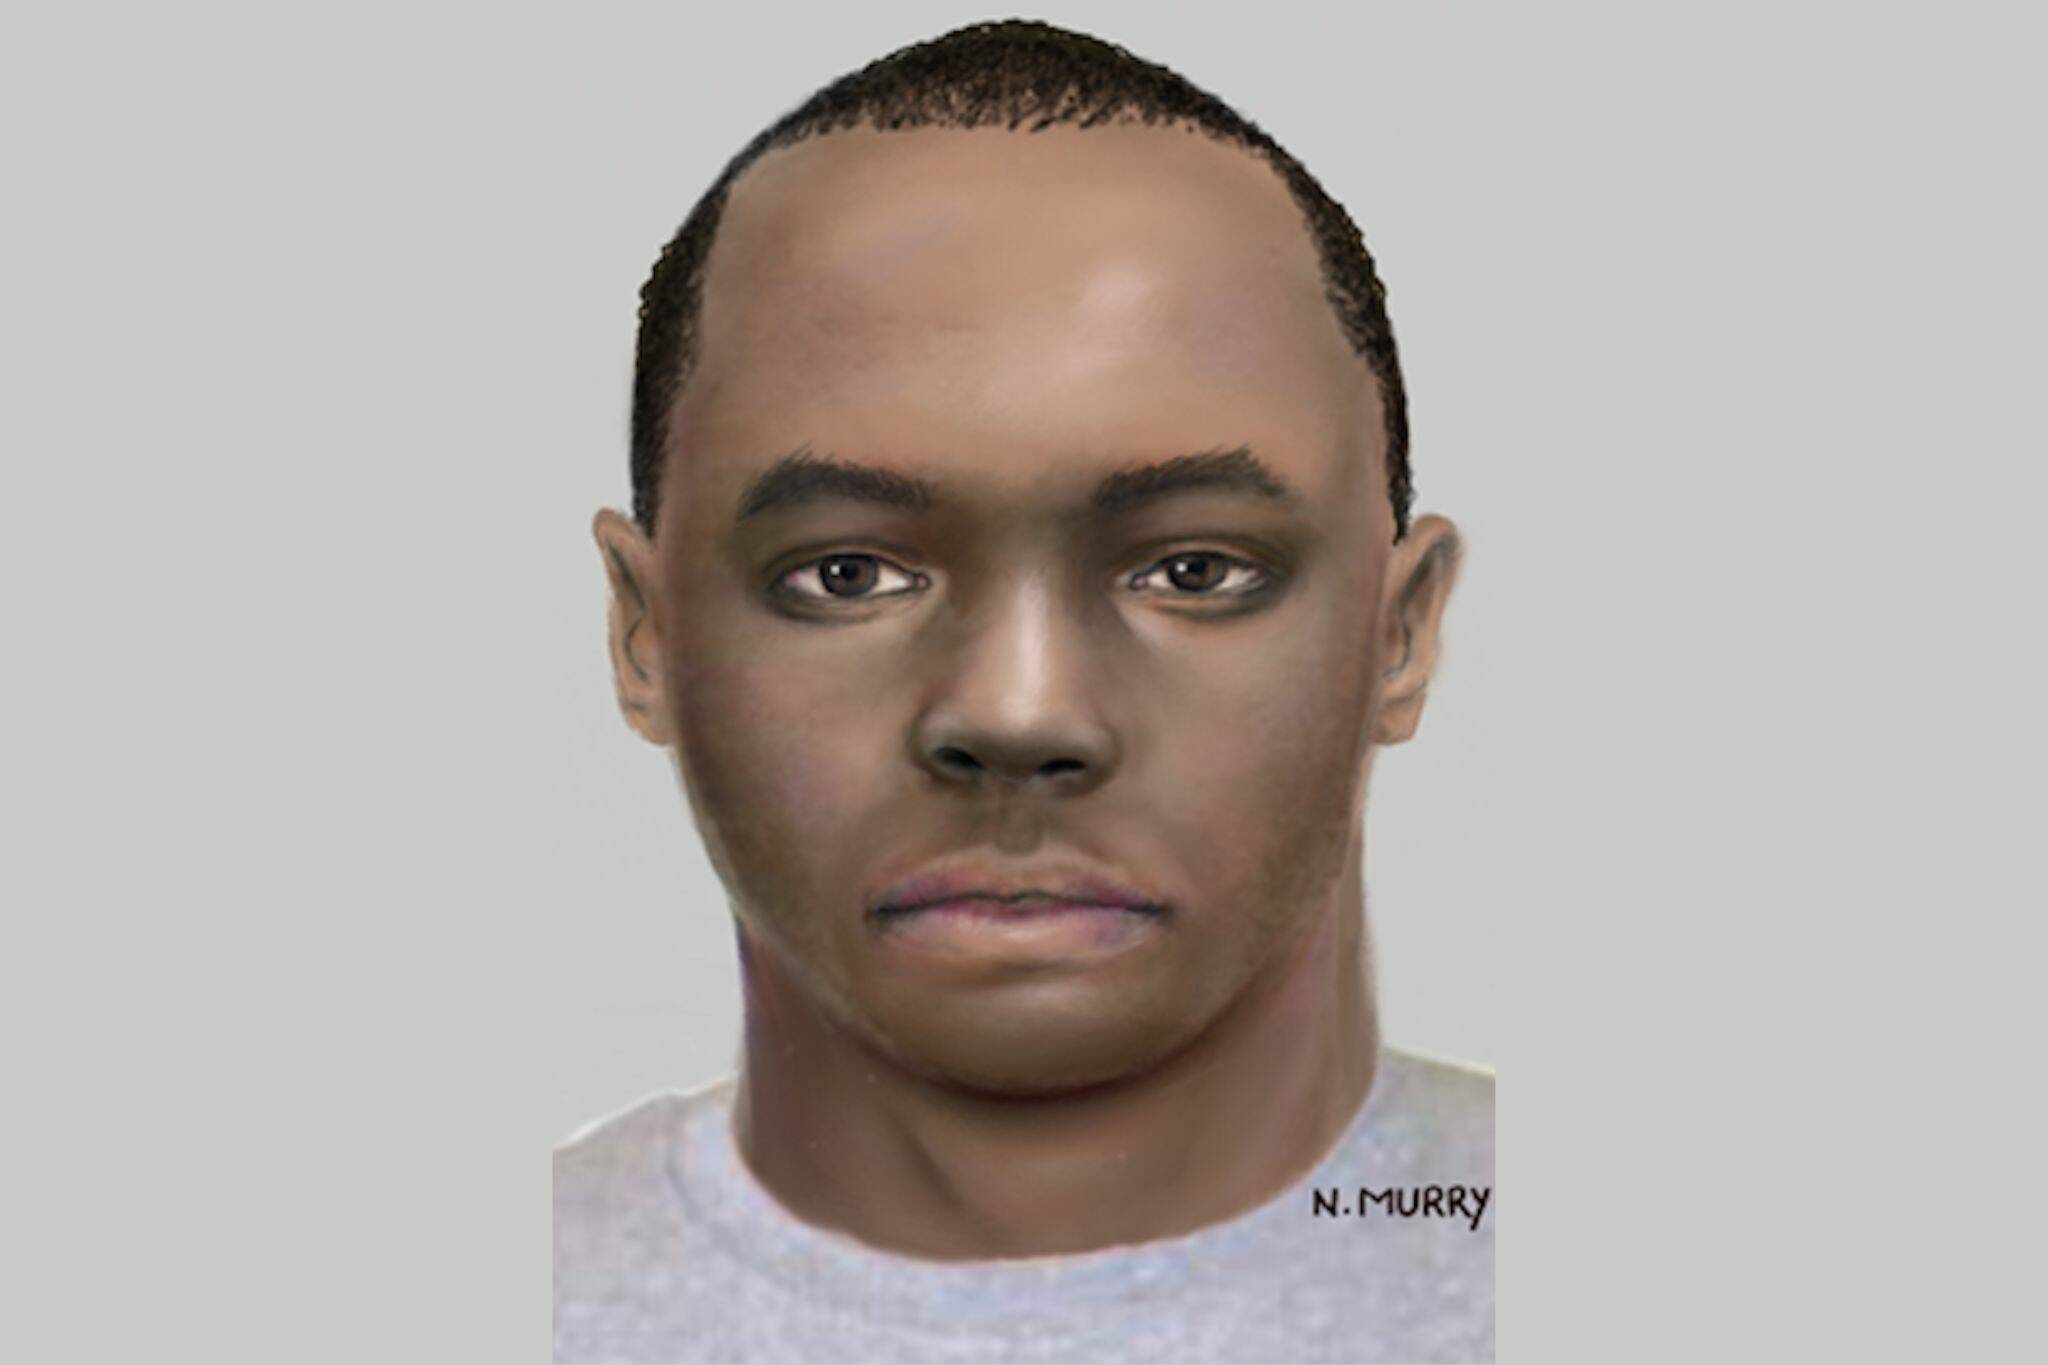 A skeletonized cranium found at Scriber Lake Park in Lynnwood, WA on March 24, 2024. The remains are likely a black male estimated to be over 25 years of age and unknown height and weight. He is estimated to have been deceased at least one year. (Provided by Snohomish County Medical Examiner's Office)